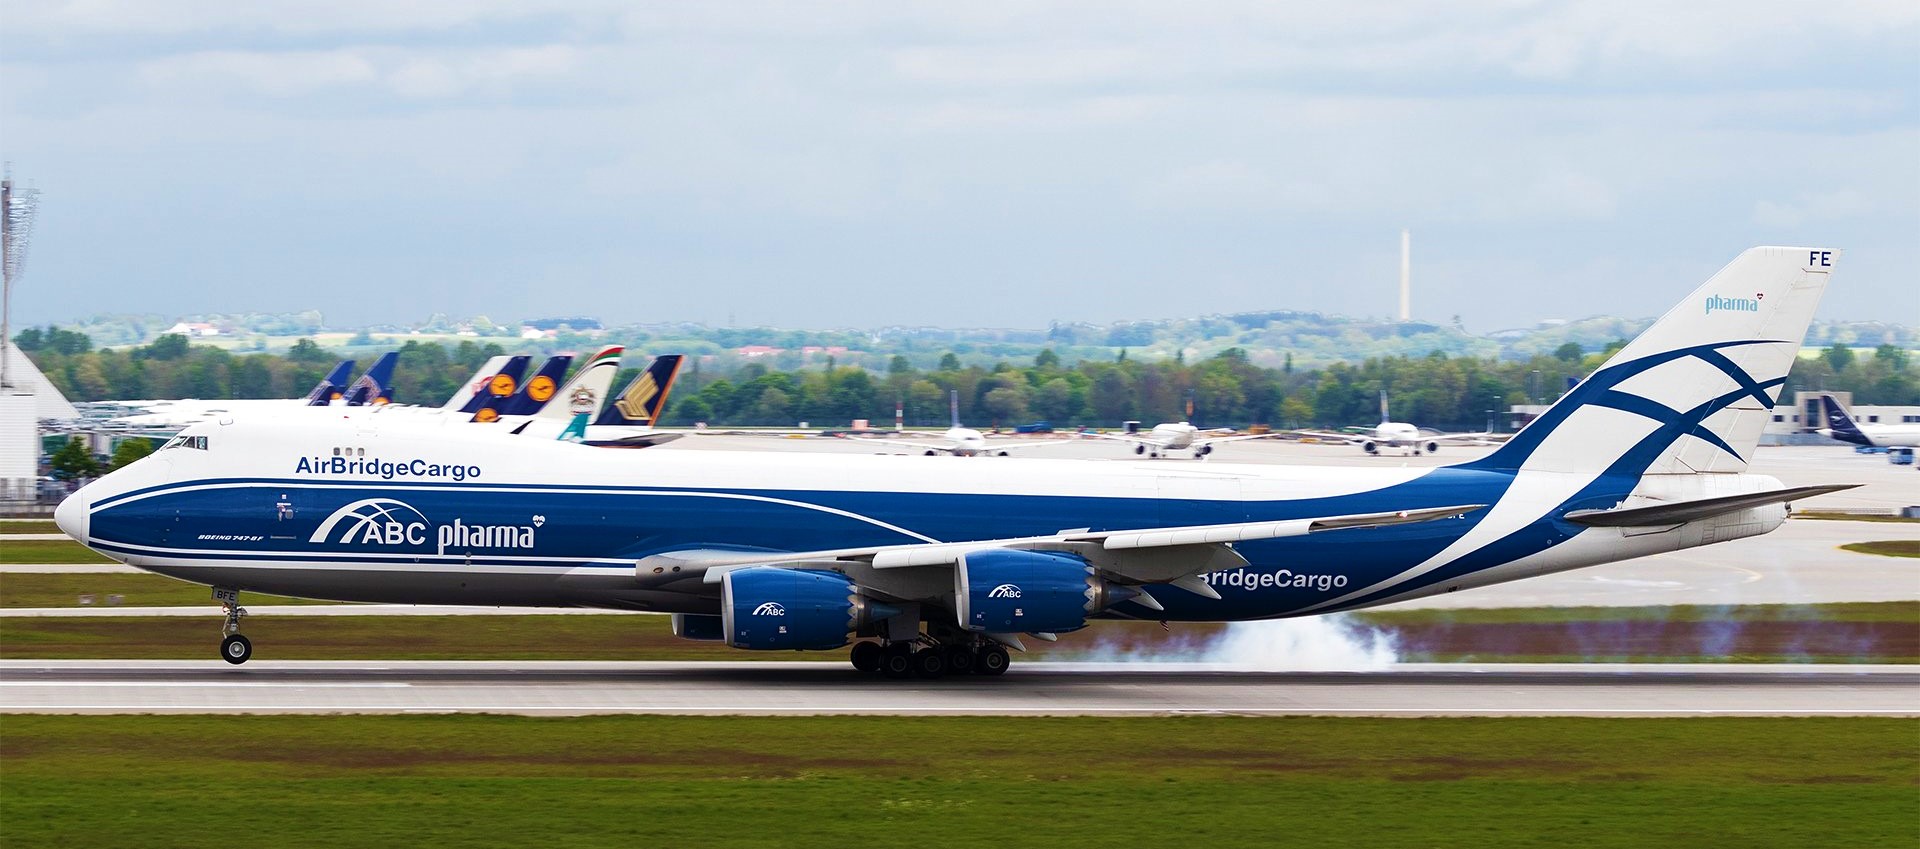 Leasing  company  BOC  Aviation  repossessed  it's  Boeing 747-8  Aircraft  from  the  Russian  Volga-Dnepr subsidiary  'Air Bridge Cargo' !